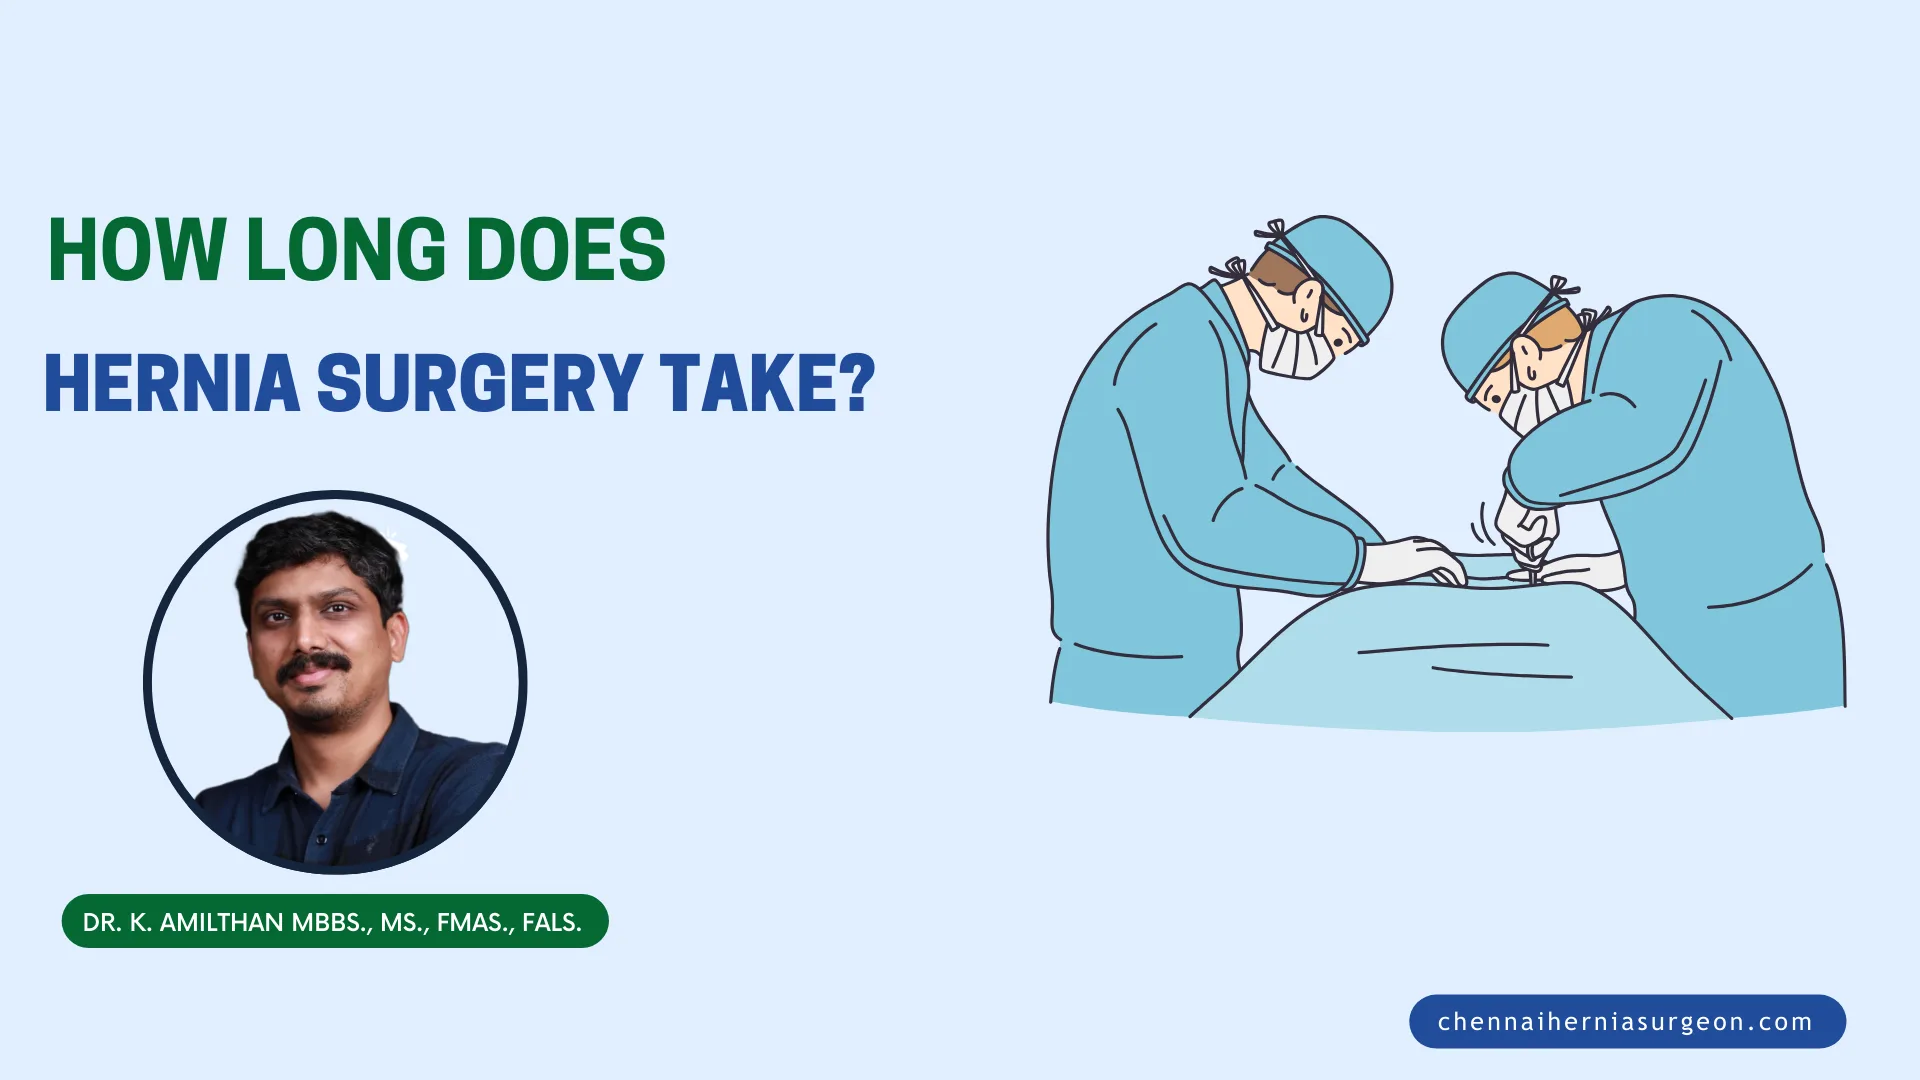 How long does hernia surgery take